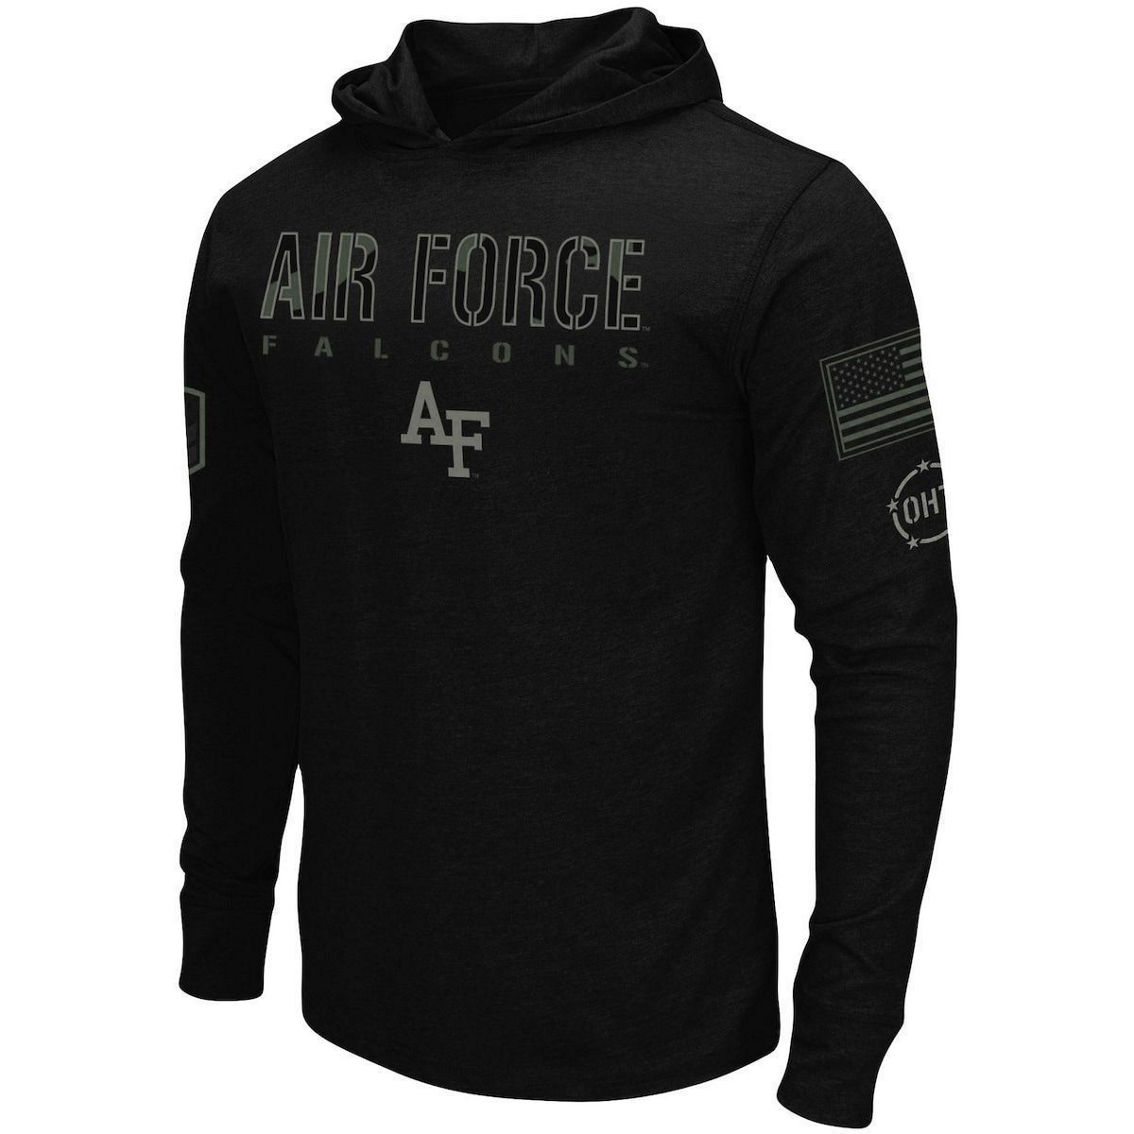 Colosseum Men's Black Air Force Falcons OHT Military Appreciation Hoodie Long Sleeve T-Shirt - Image 3 of 4